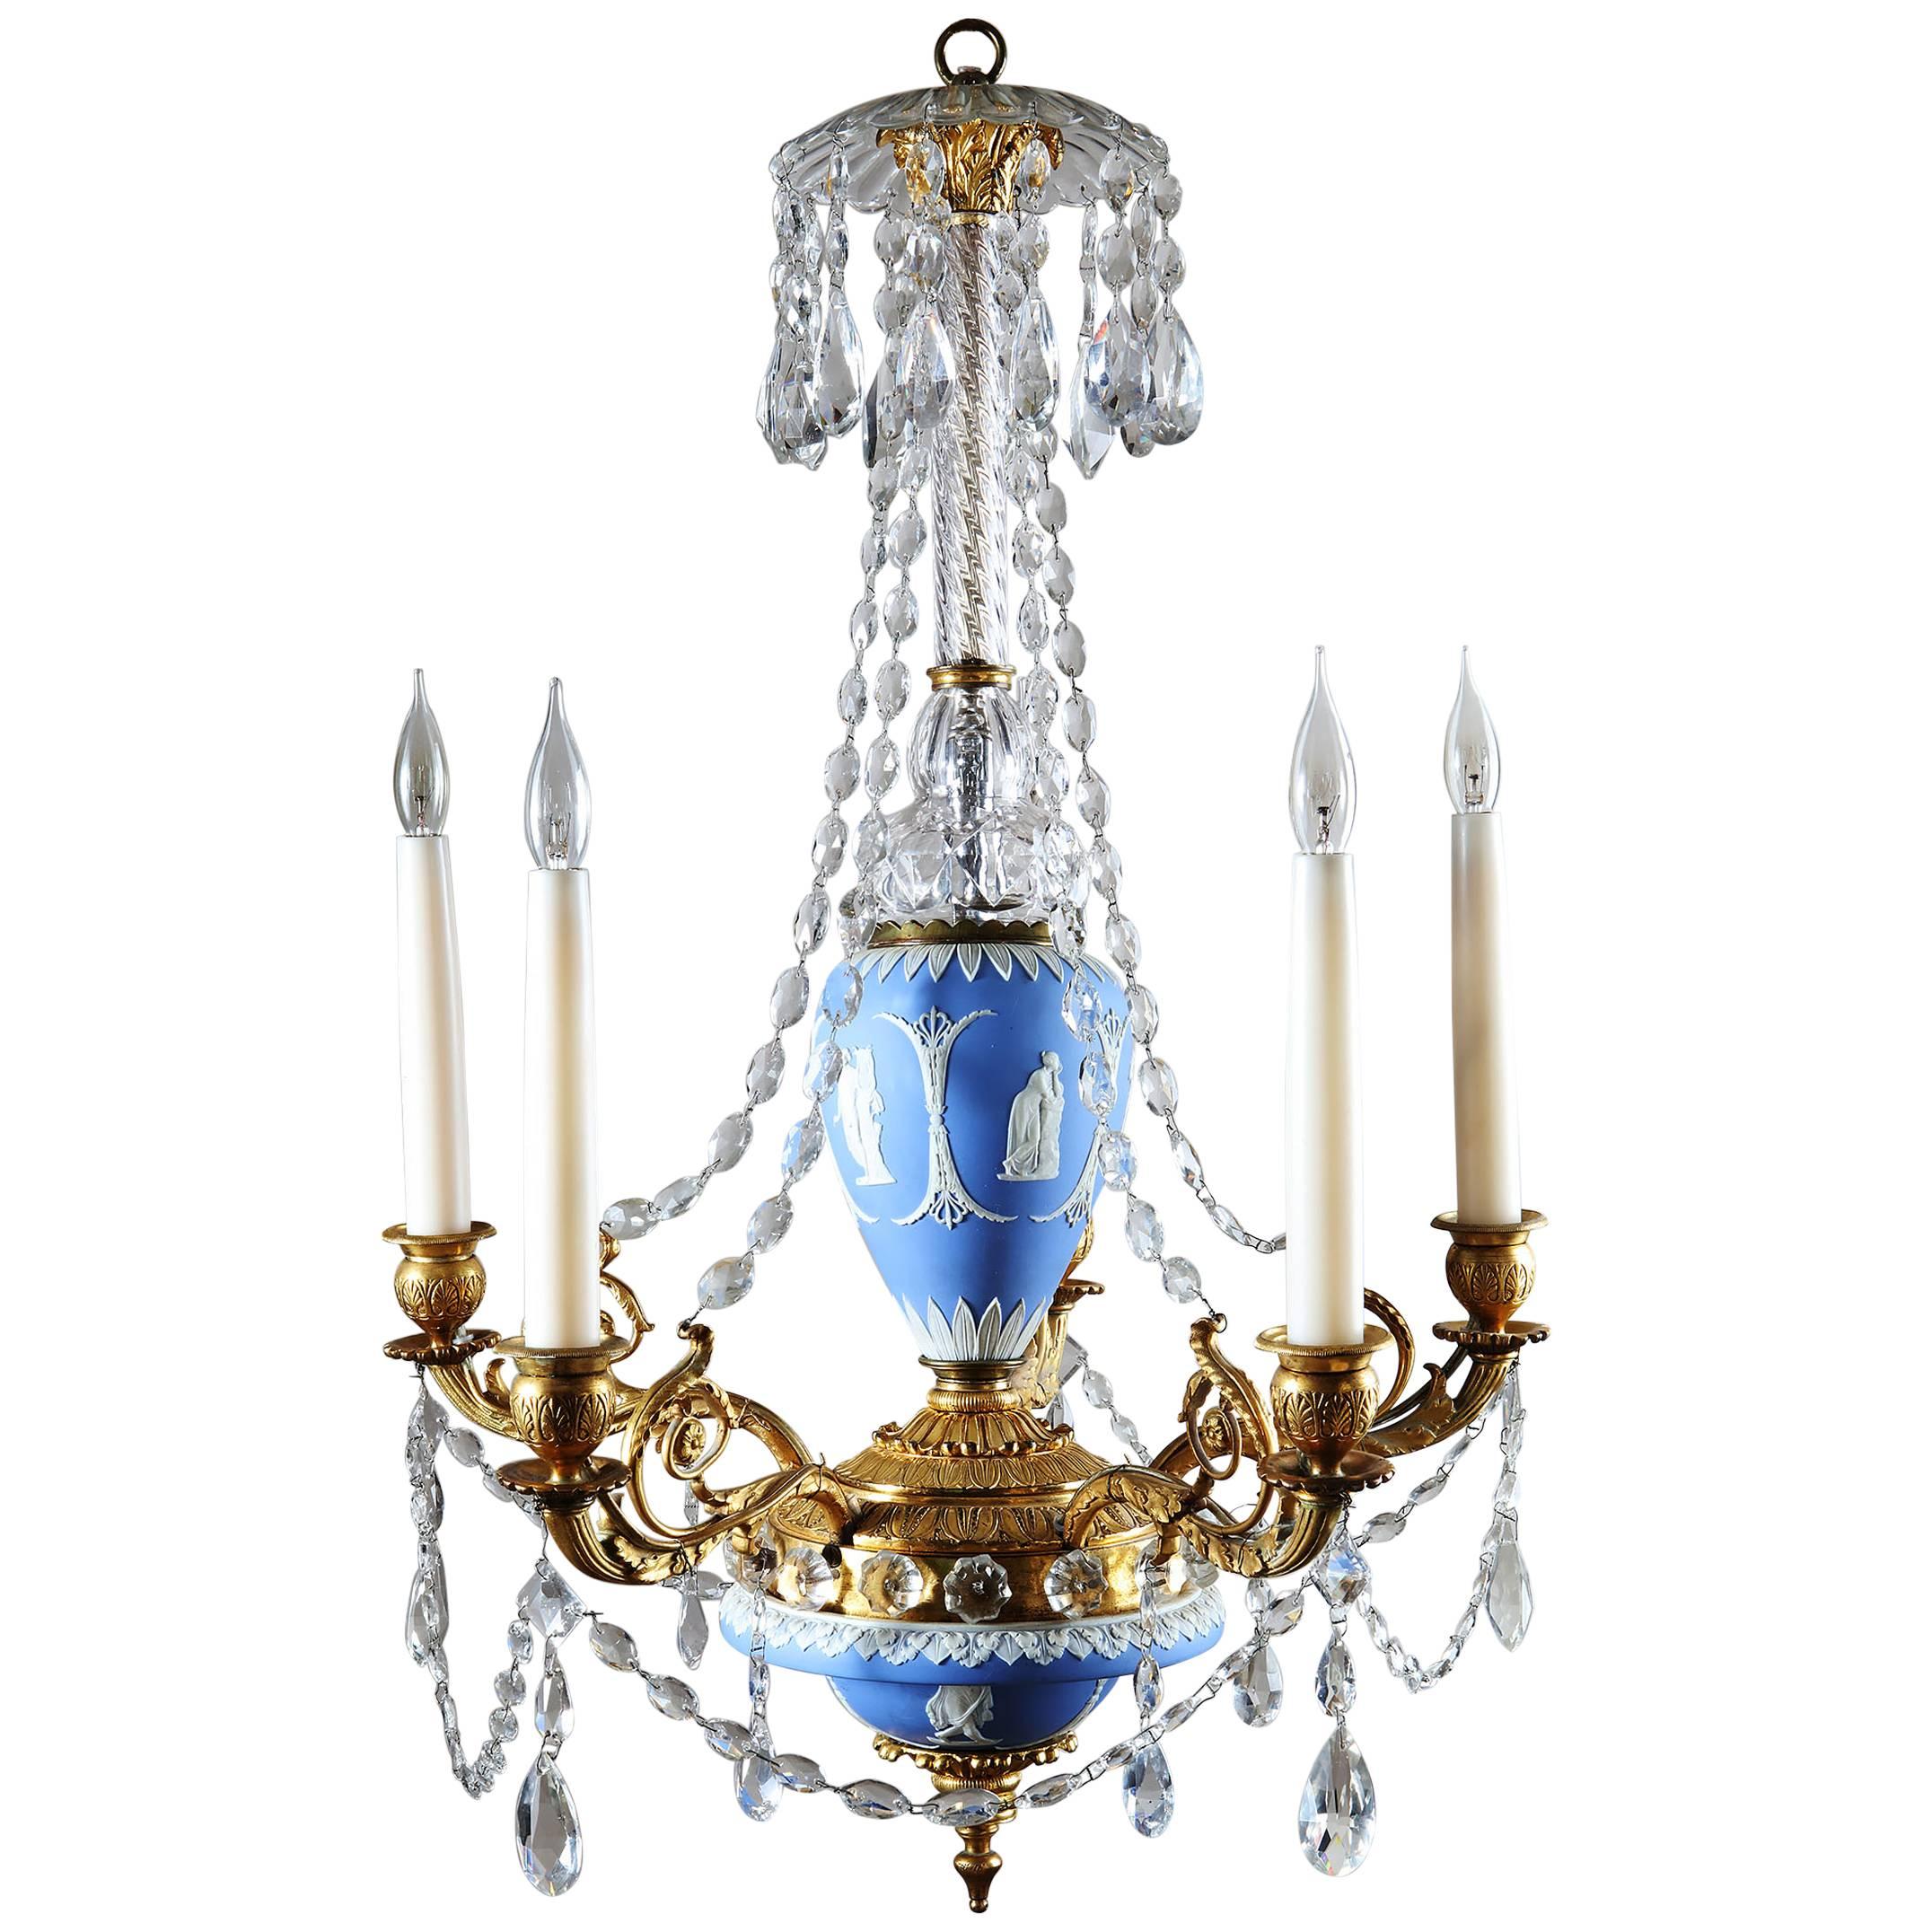 Antique English Early 19th Century Wedgwood Chandelier For Sale